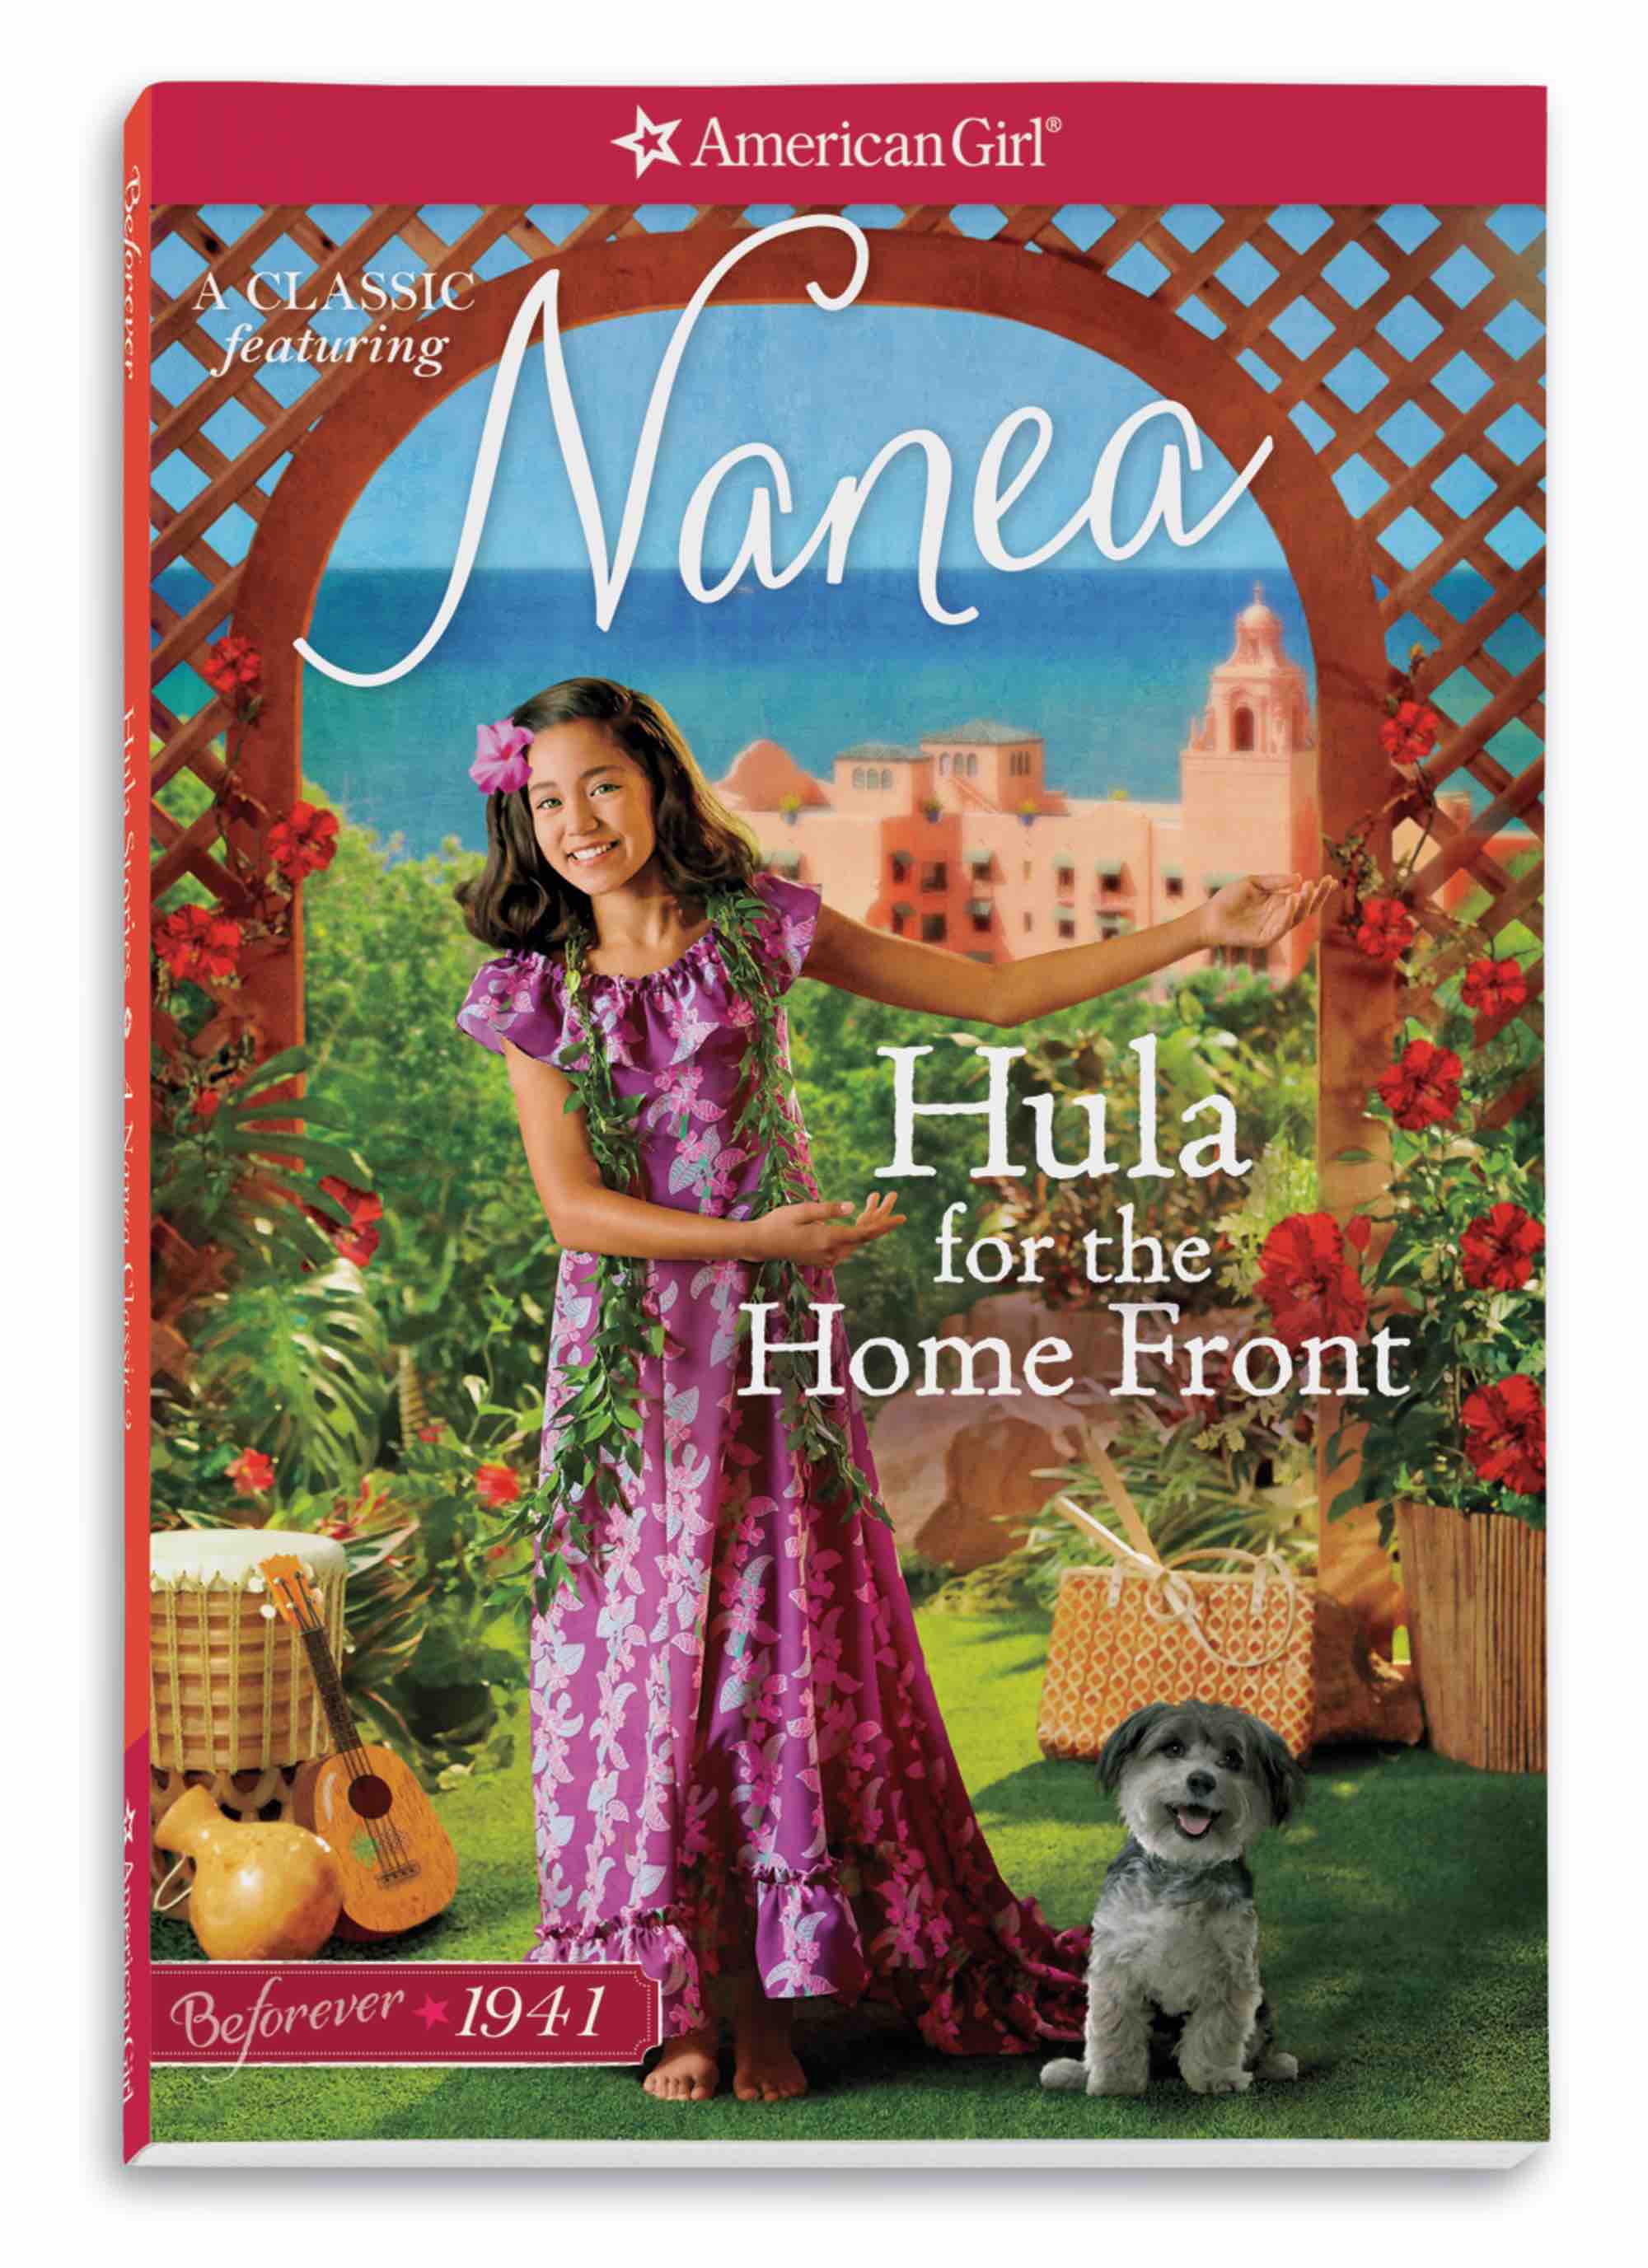 https://www.crackingthecover.com/wp-content/uploads/2017/09/Hula-for-the-Home-Front-LR.jpg